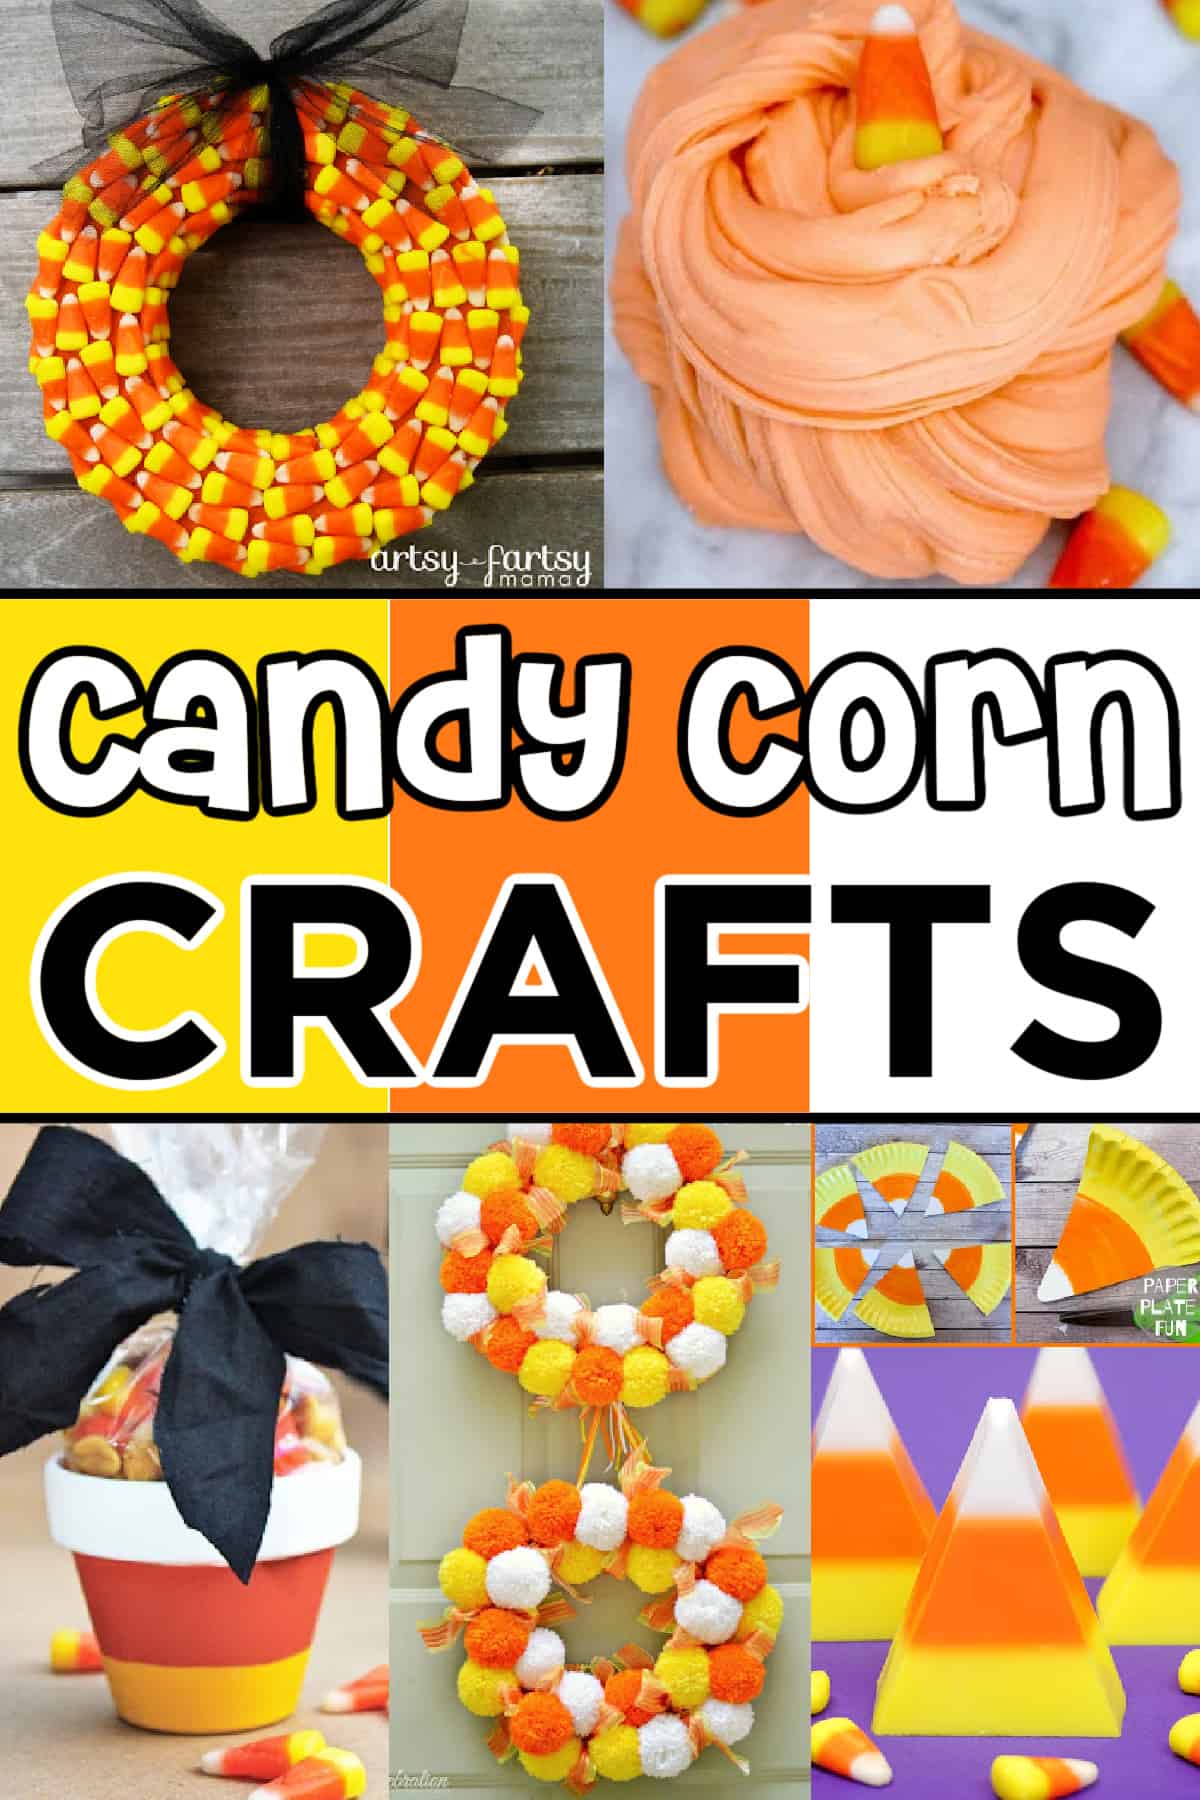 Fun with Felt: Crafts That Kids and Adults Can Enjoy Making - DIY Candy